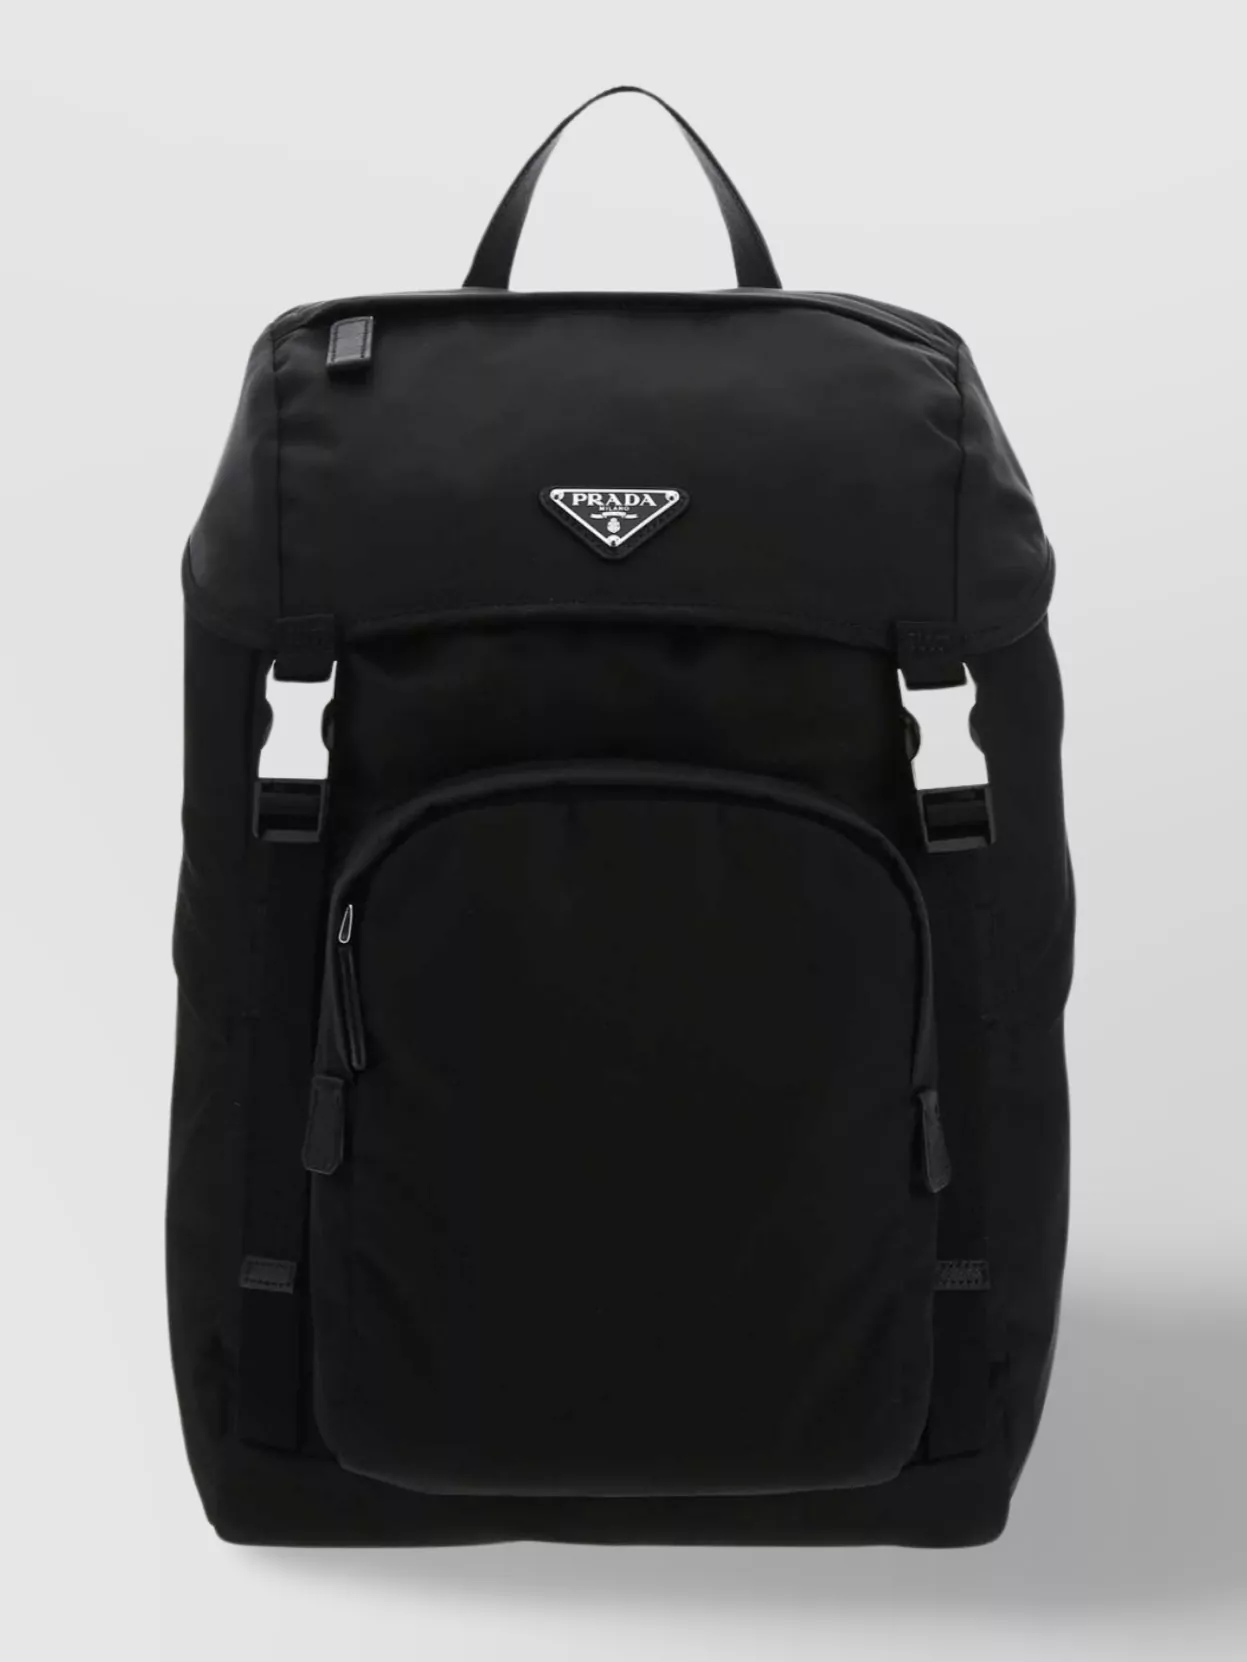 Prada Nylon Backpack With Adjustable Straps And Pockets